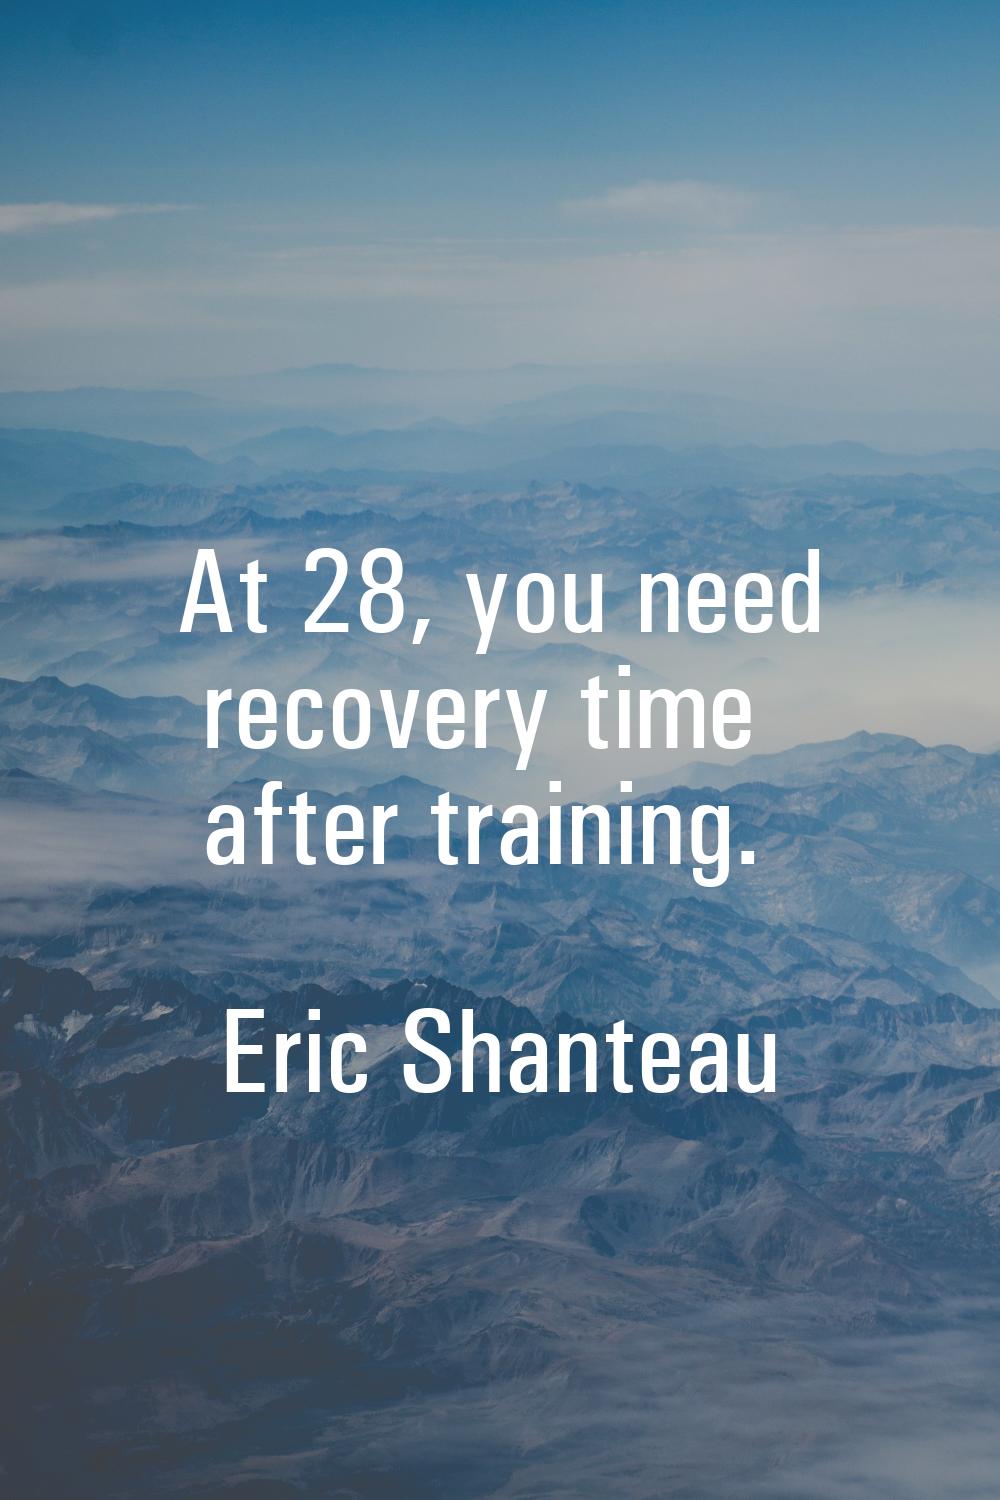 At 28, you need recovery time after training.